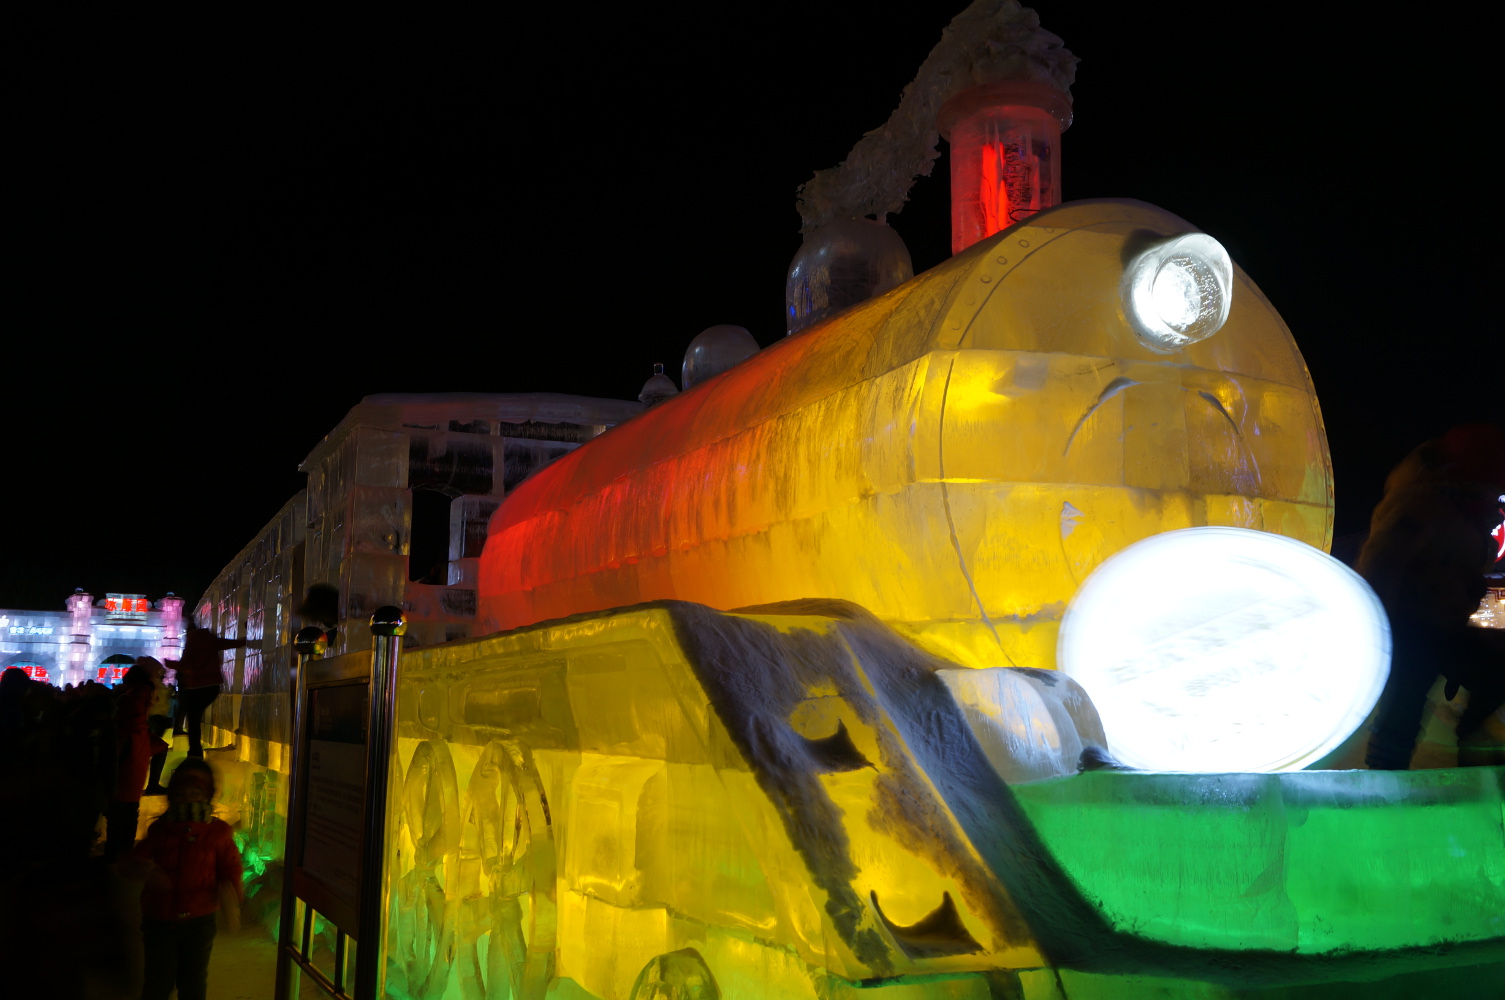 Icy train sculpture nods to Harbin's long railway history. Image by Anita Isalska / Lonely Planet